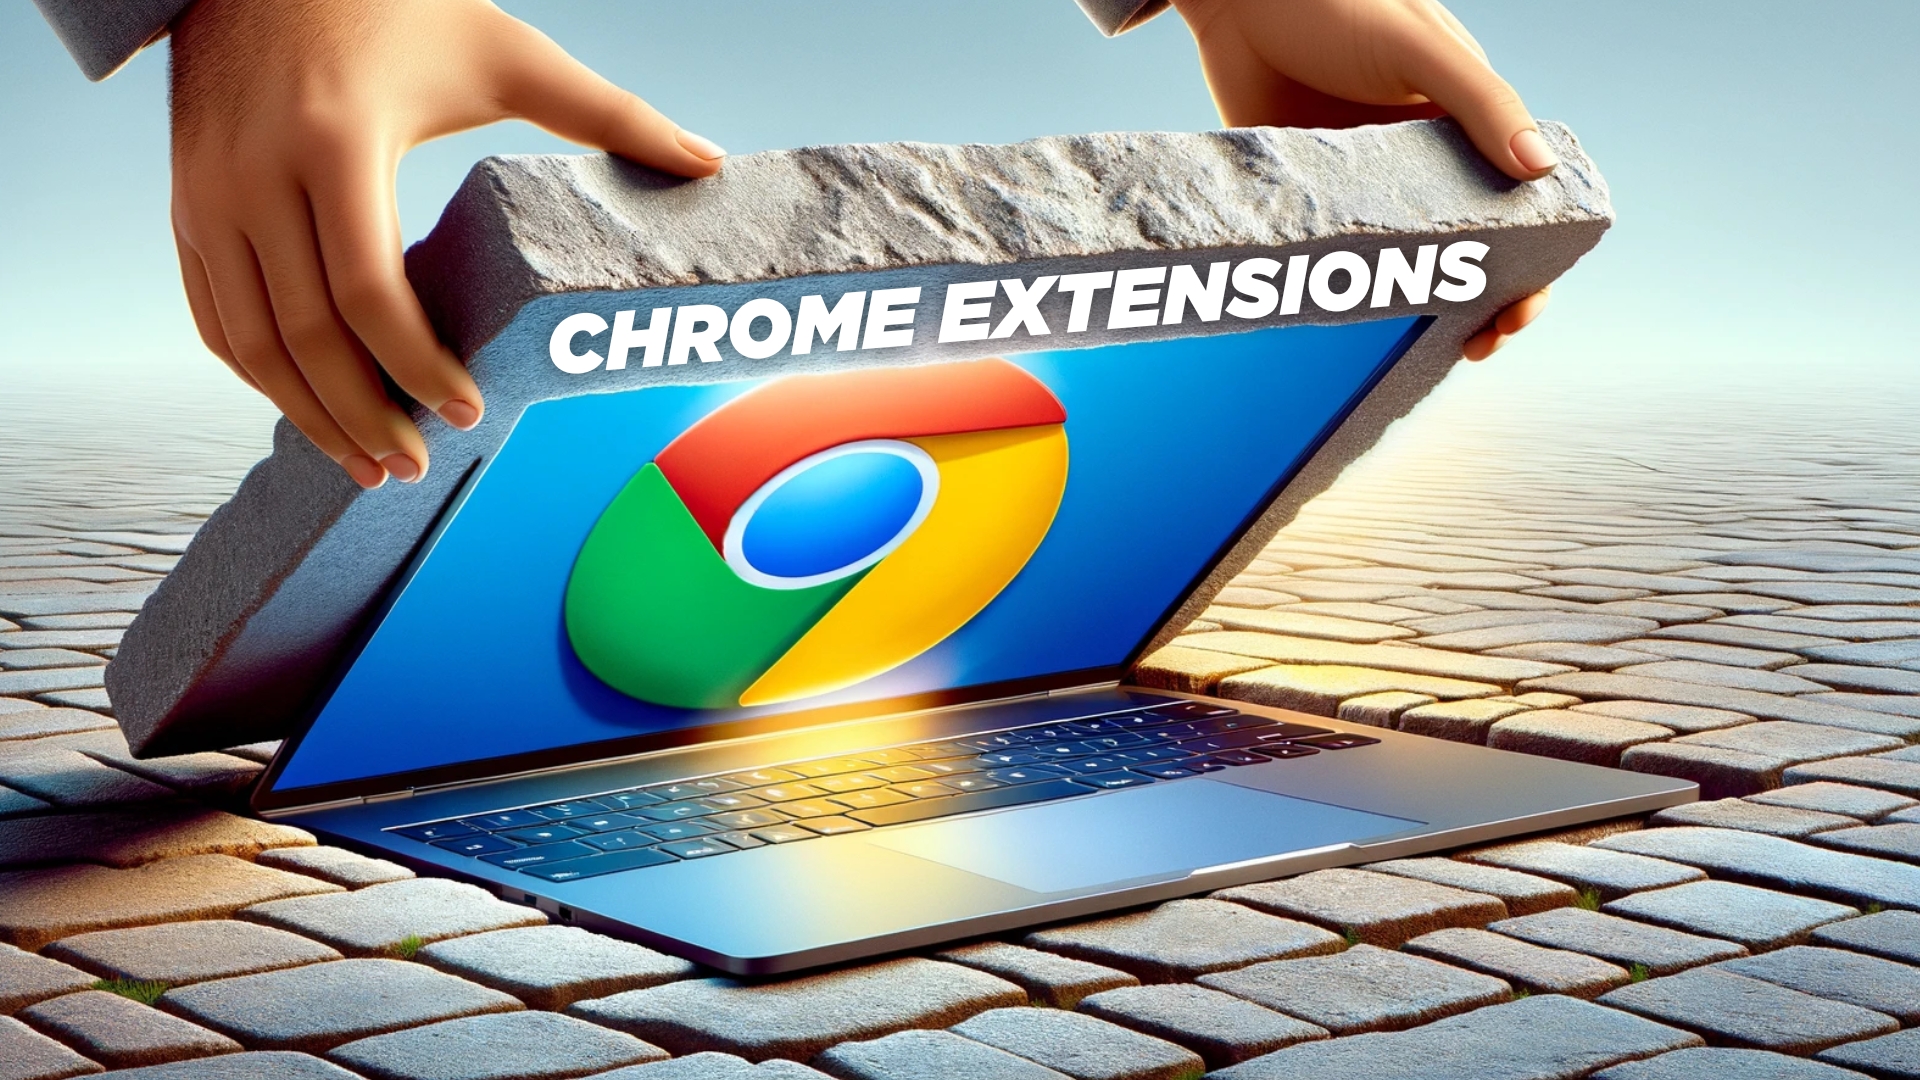 A better way to find Chrome extensions